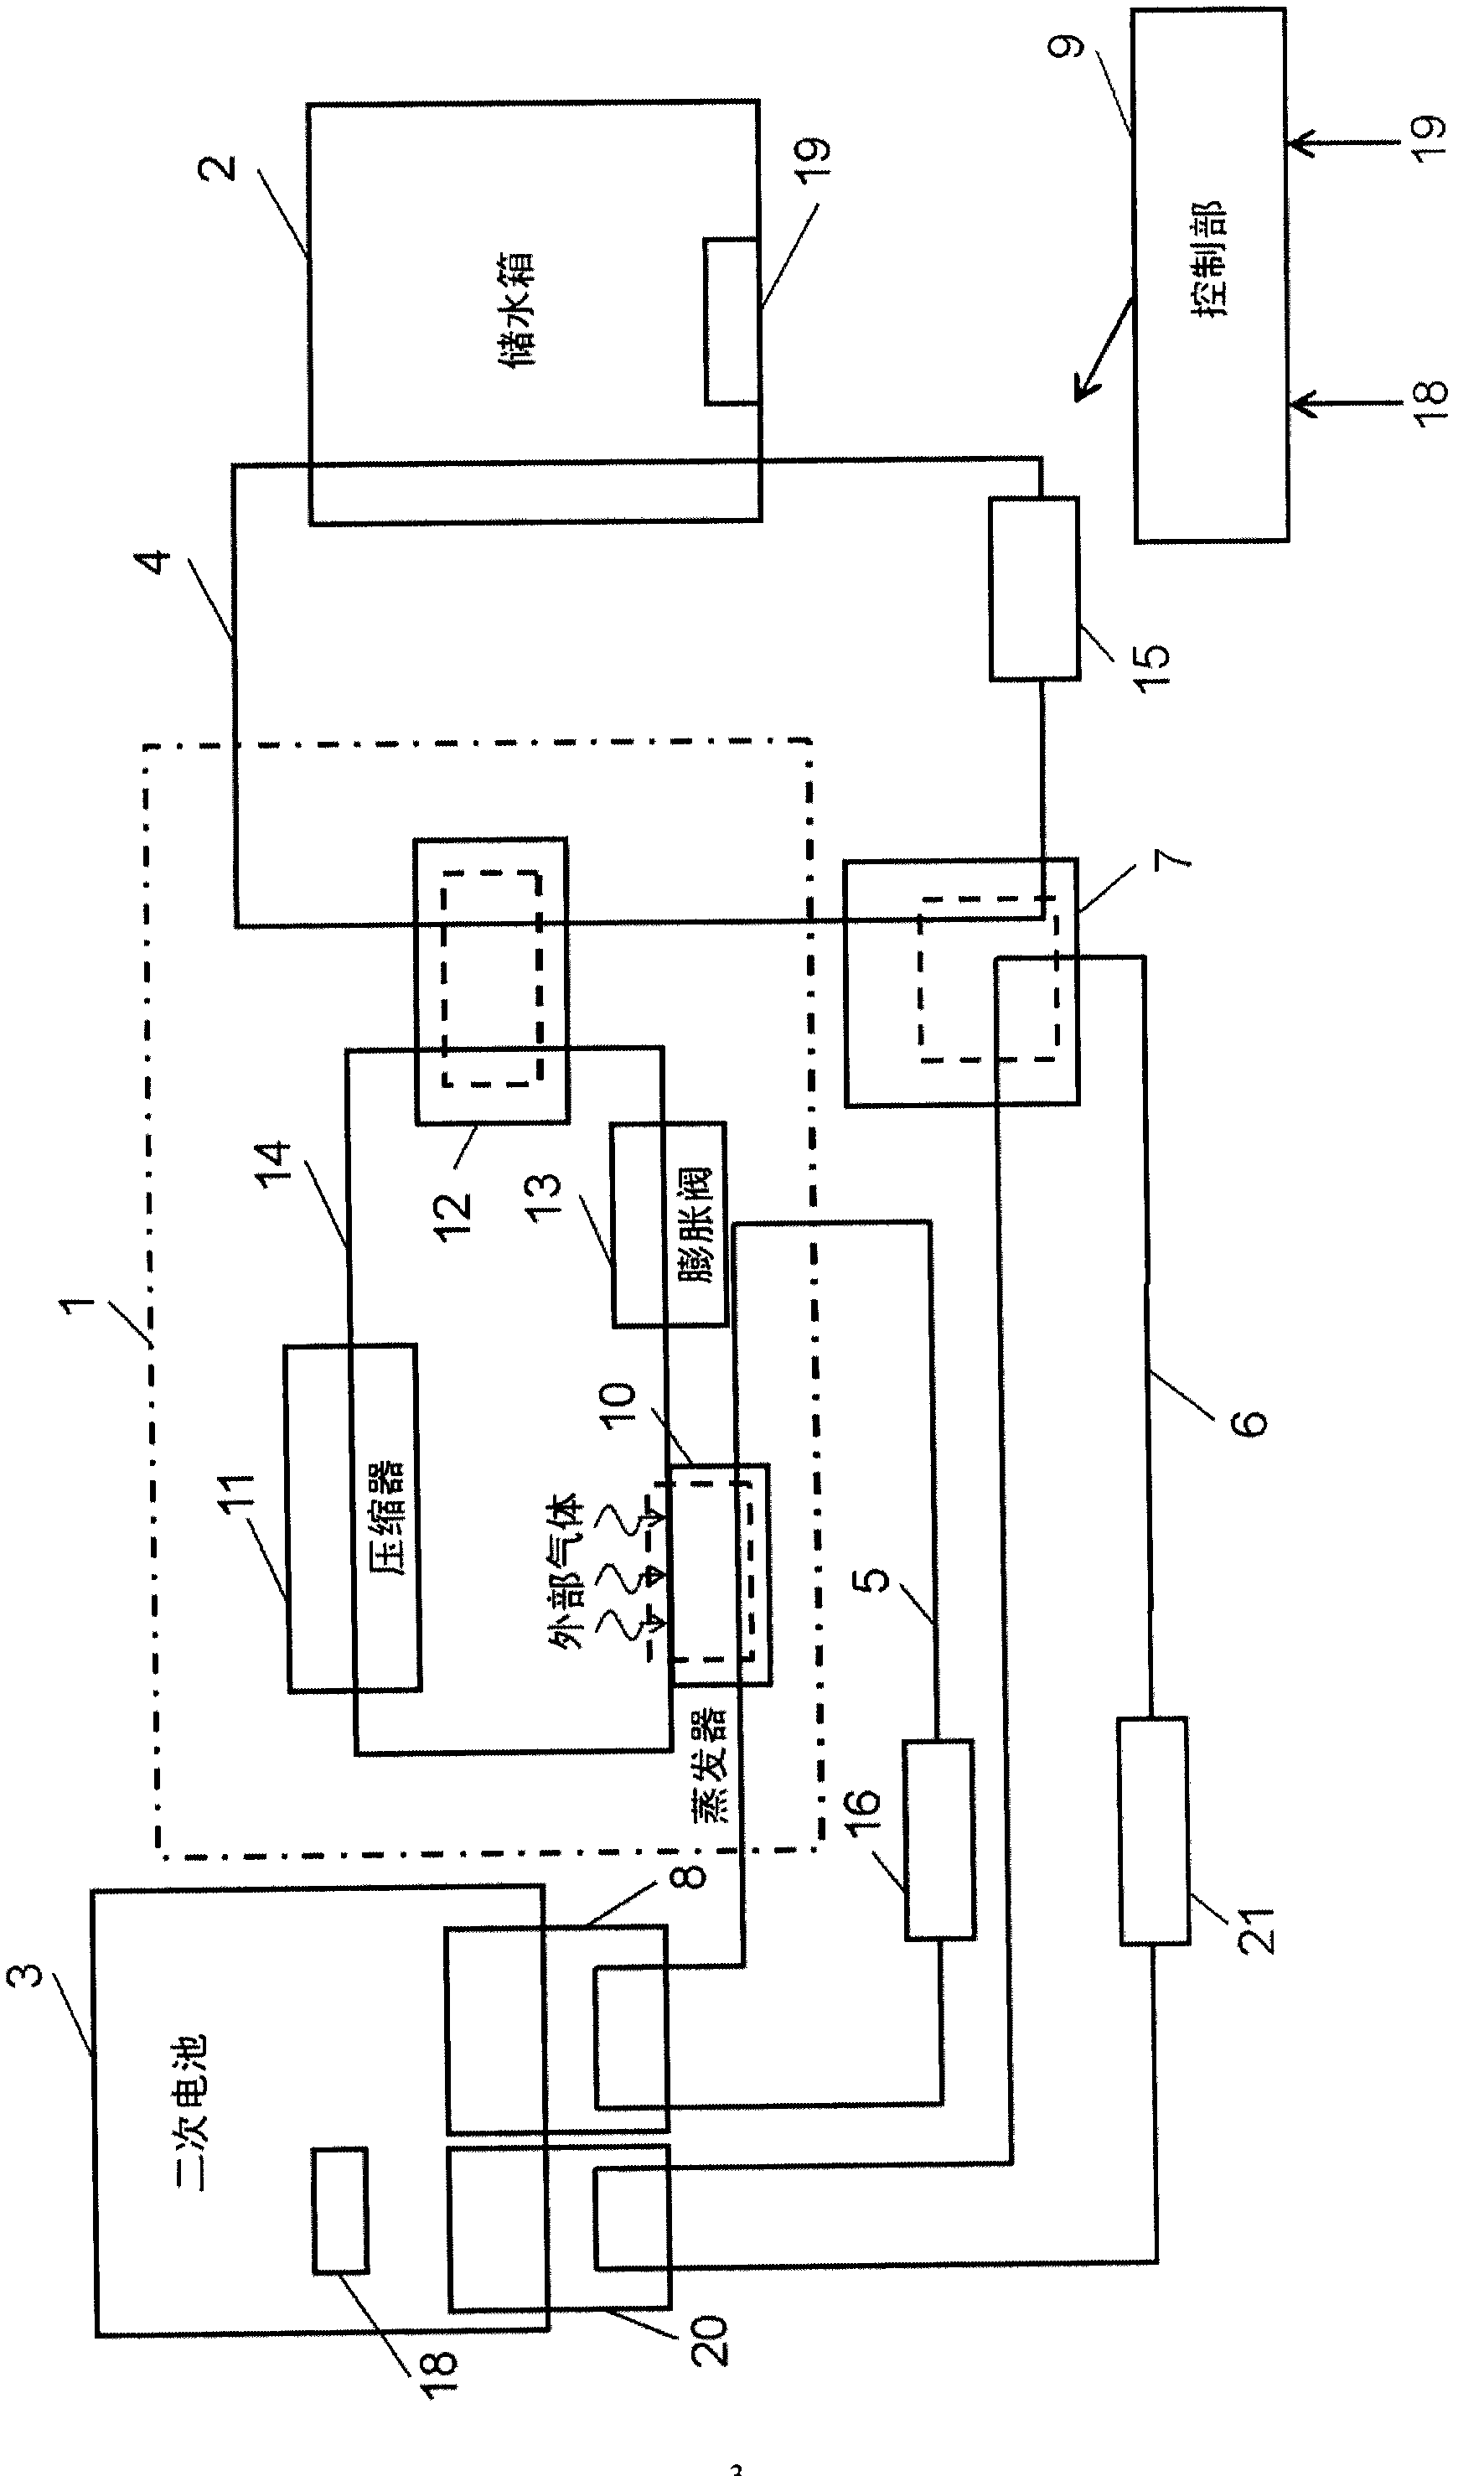 Hot water storage-type hot water supply system and method for operating same